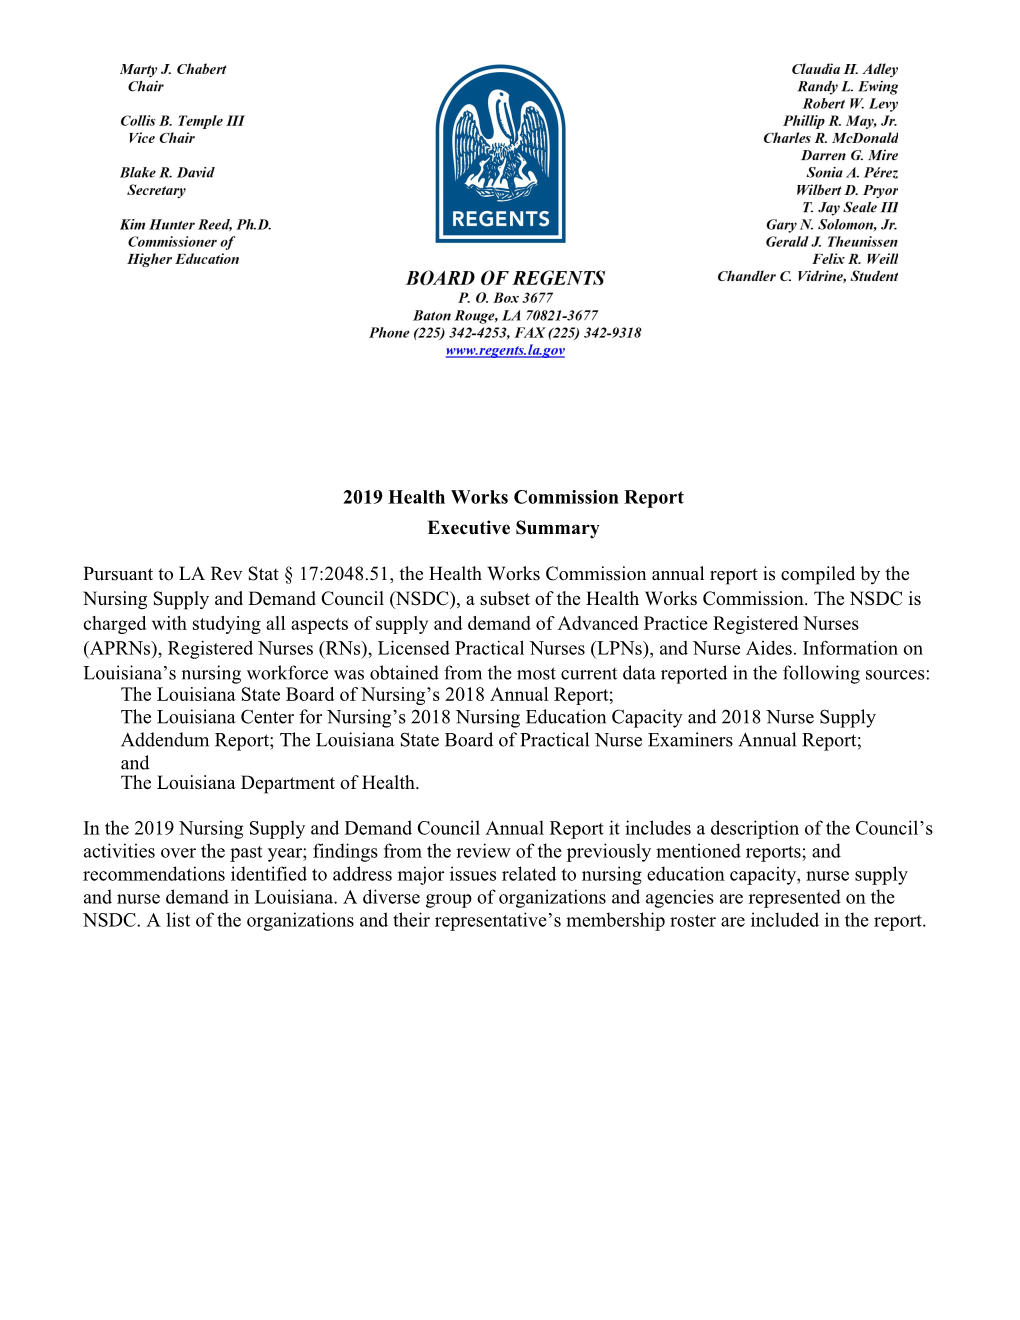 2019 ANNUAL REPORT SUBMITTED to the HEALTH WORKS COMMISSION March 2020